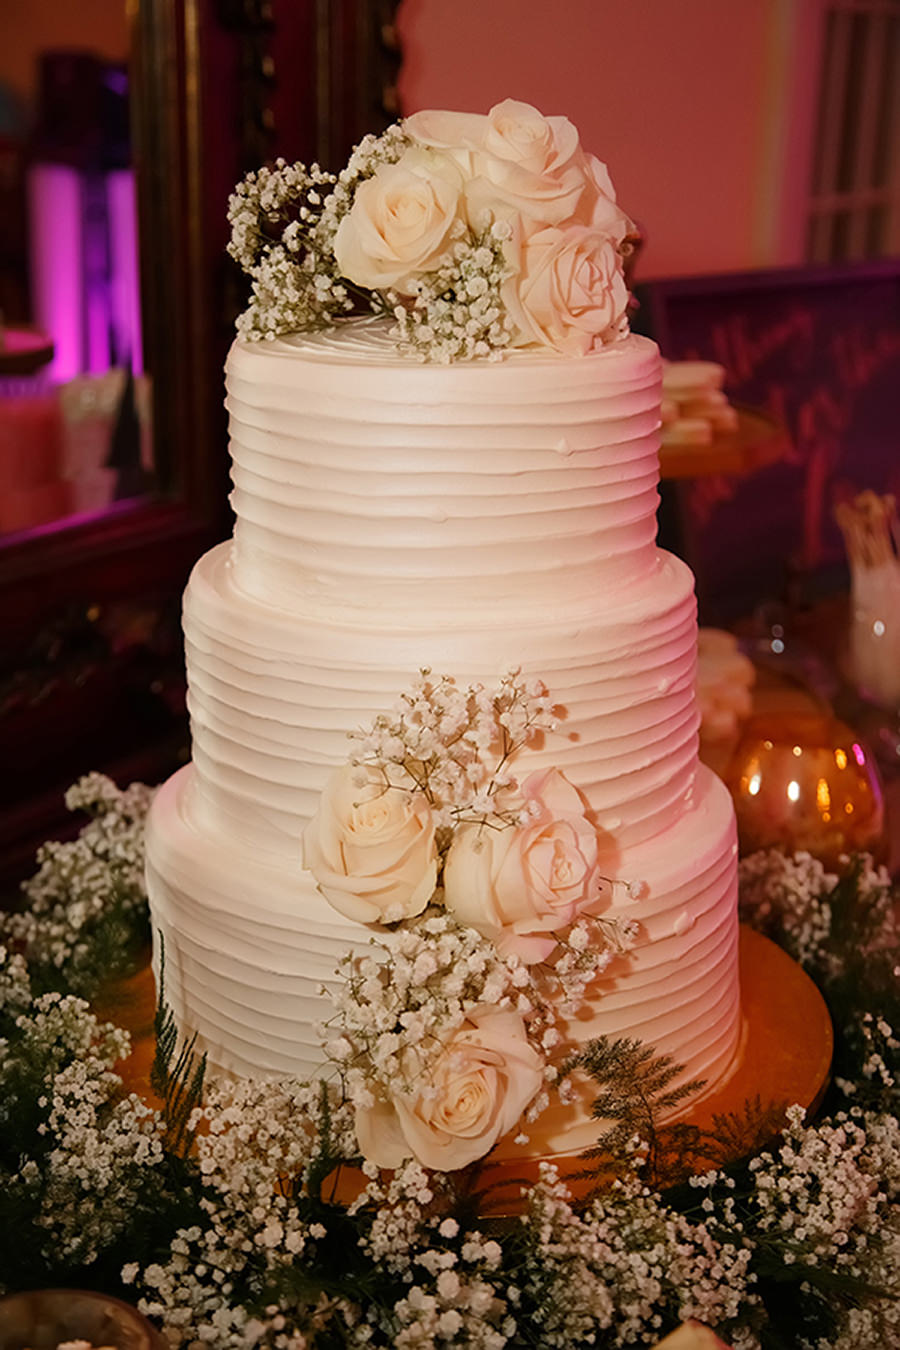 Three Tier Wedding Cake with White Roses, Baby's Breath and Greenery